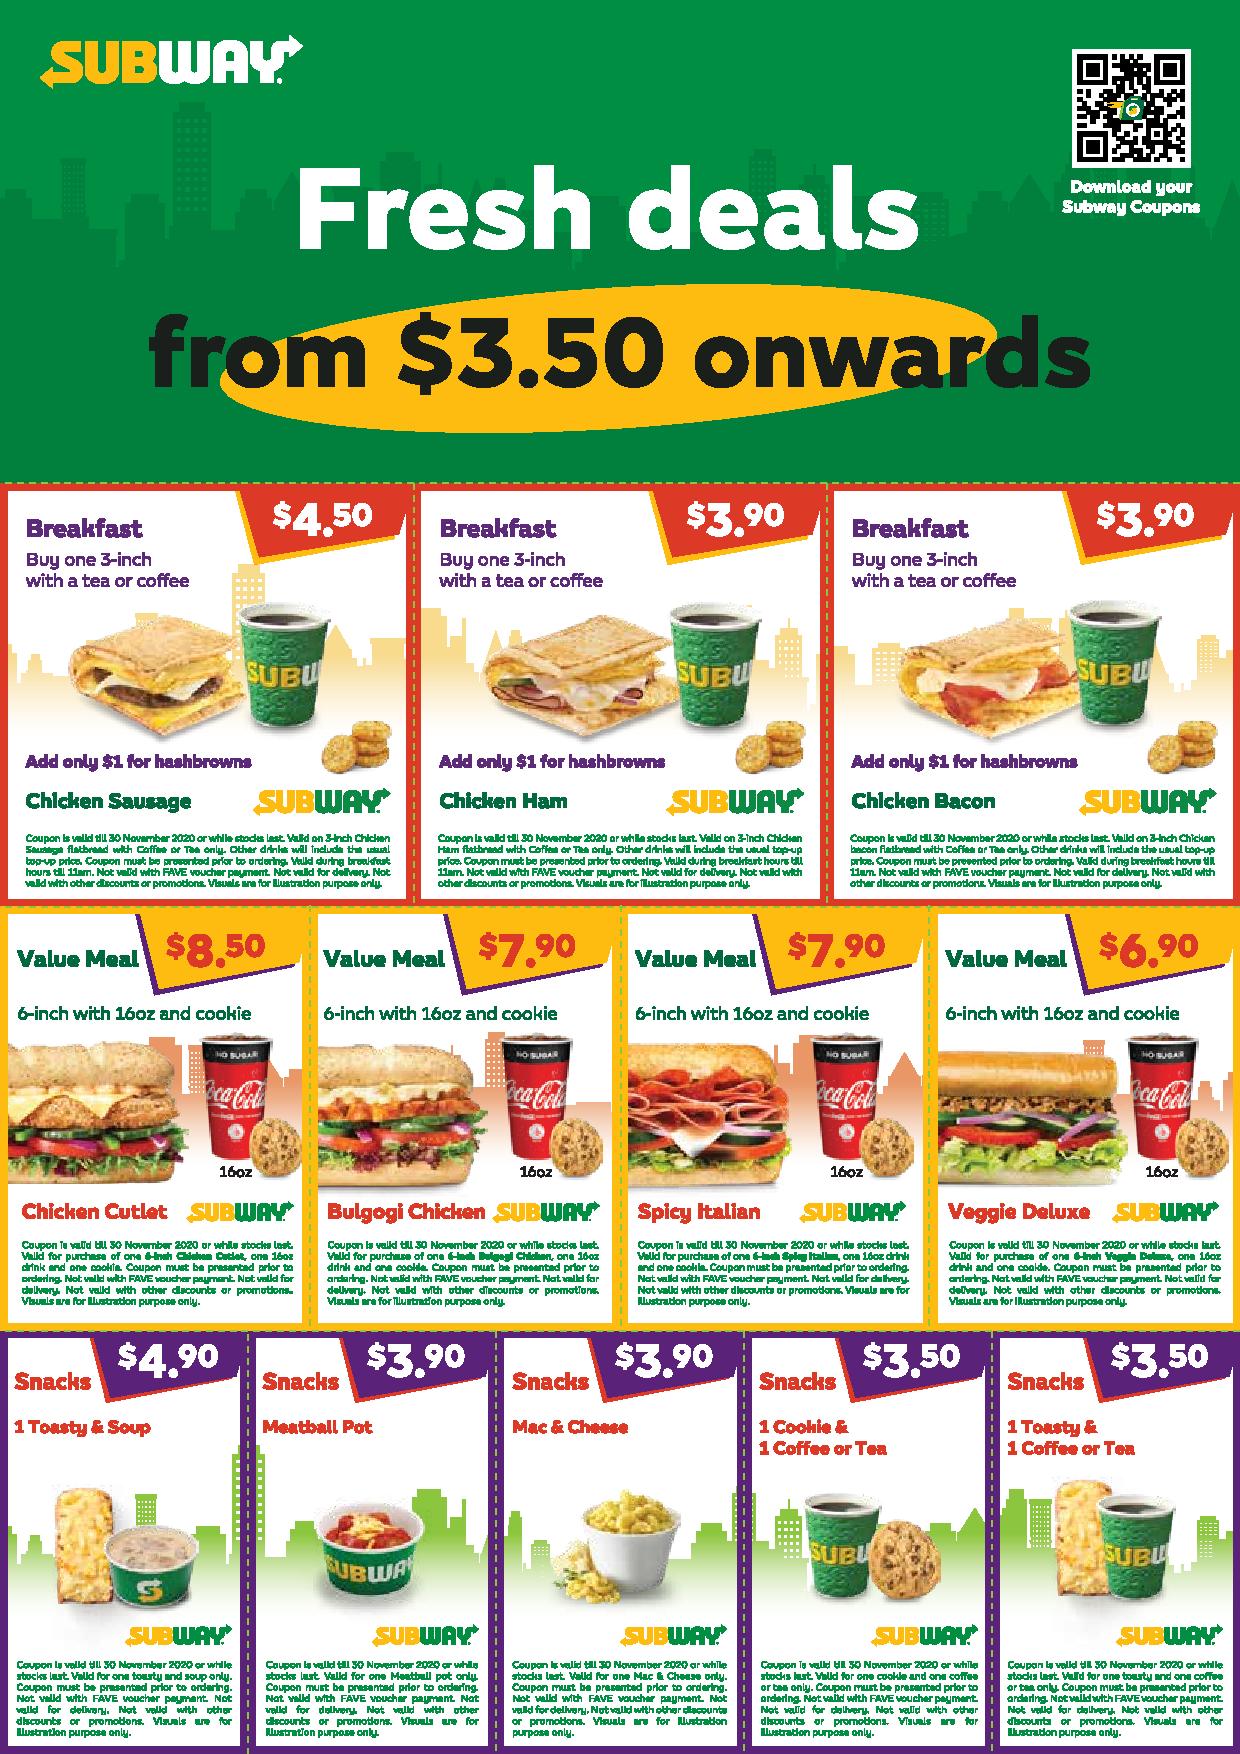 12 Subway coupons you can use for the month of November 2020